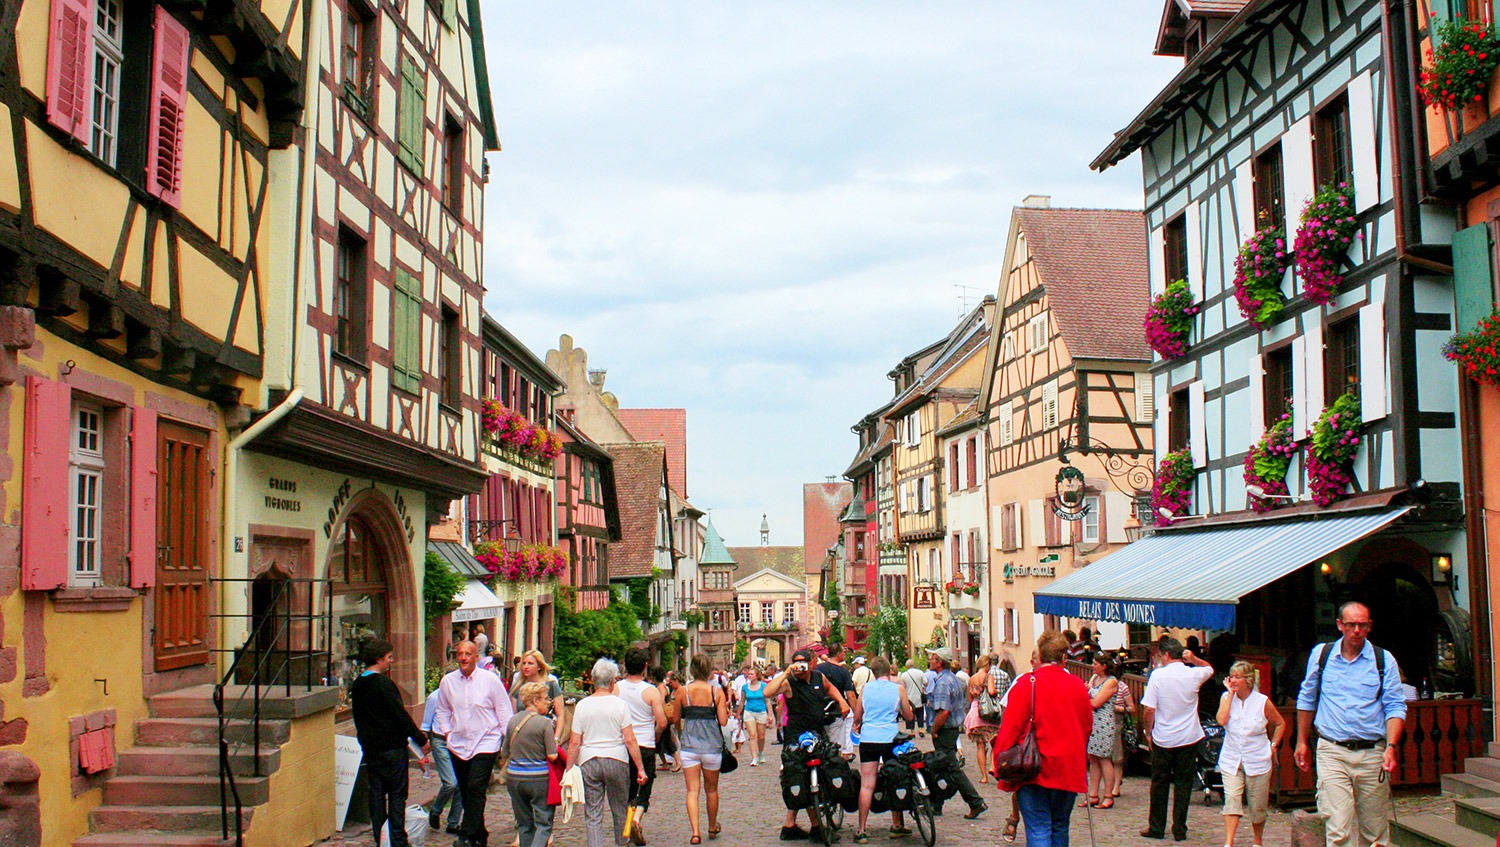 The 8 Most Beautiful Villages In France From Alsace To The Riviera